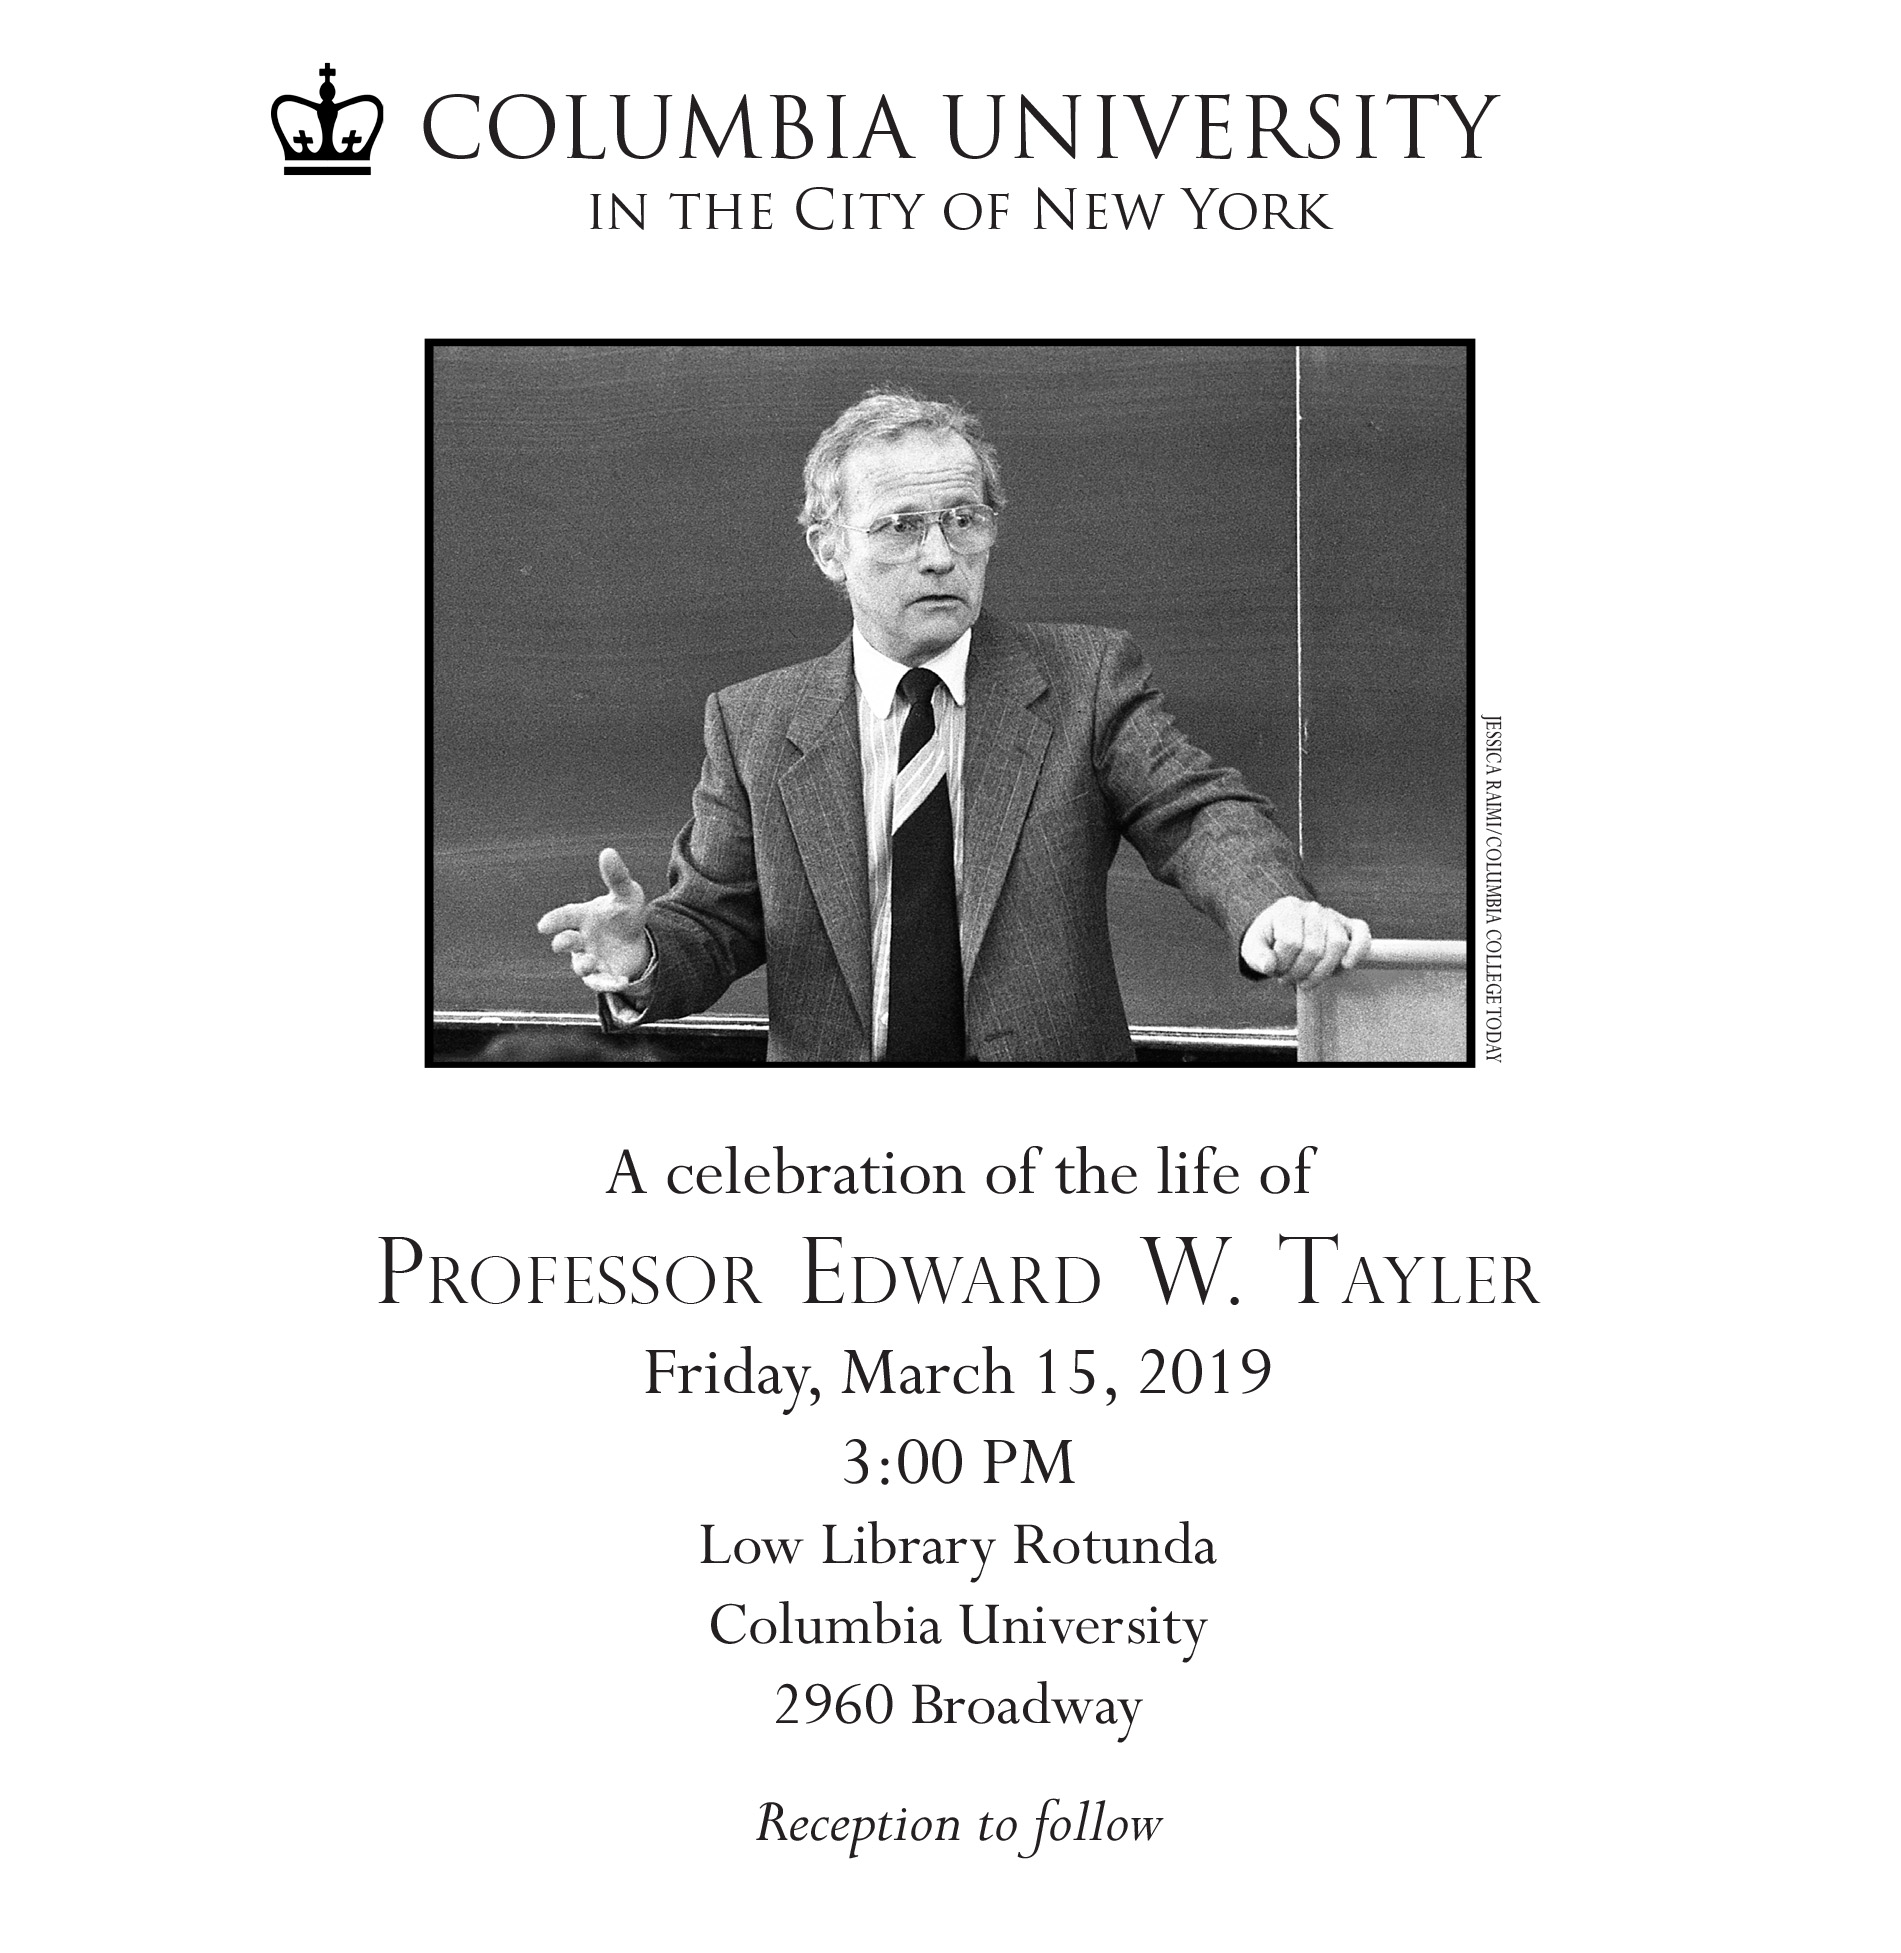 Celebrate the life of Ted Tayler on Fri., March 15